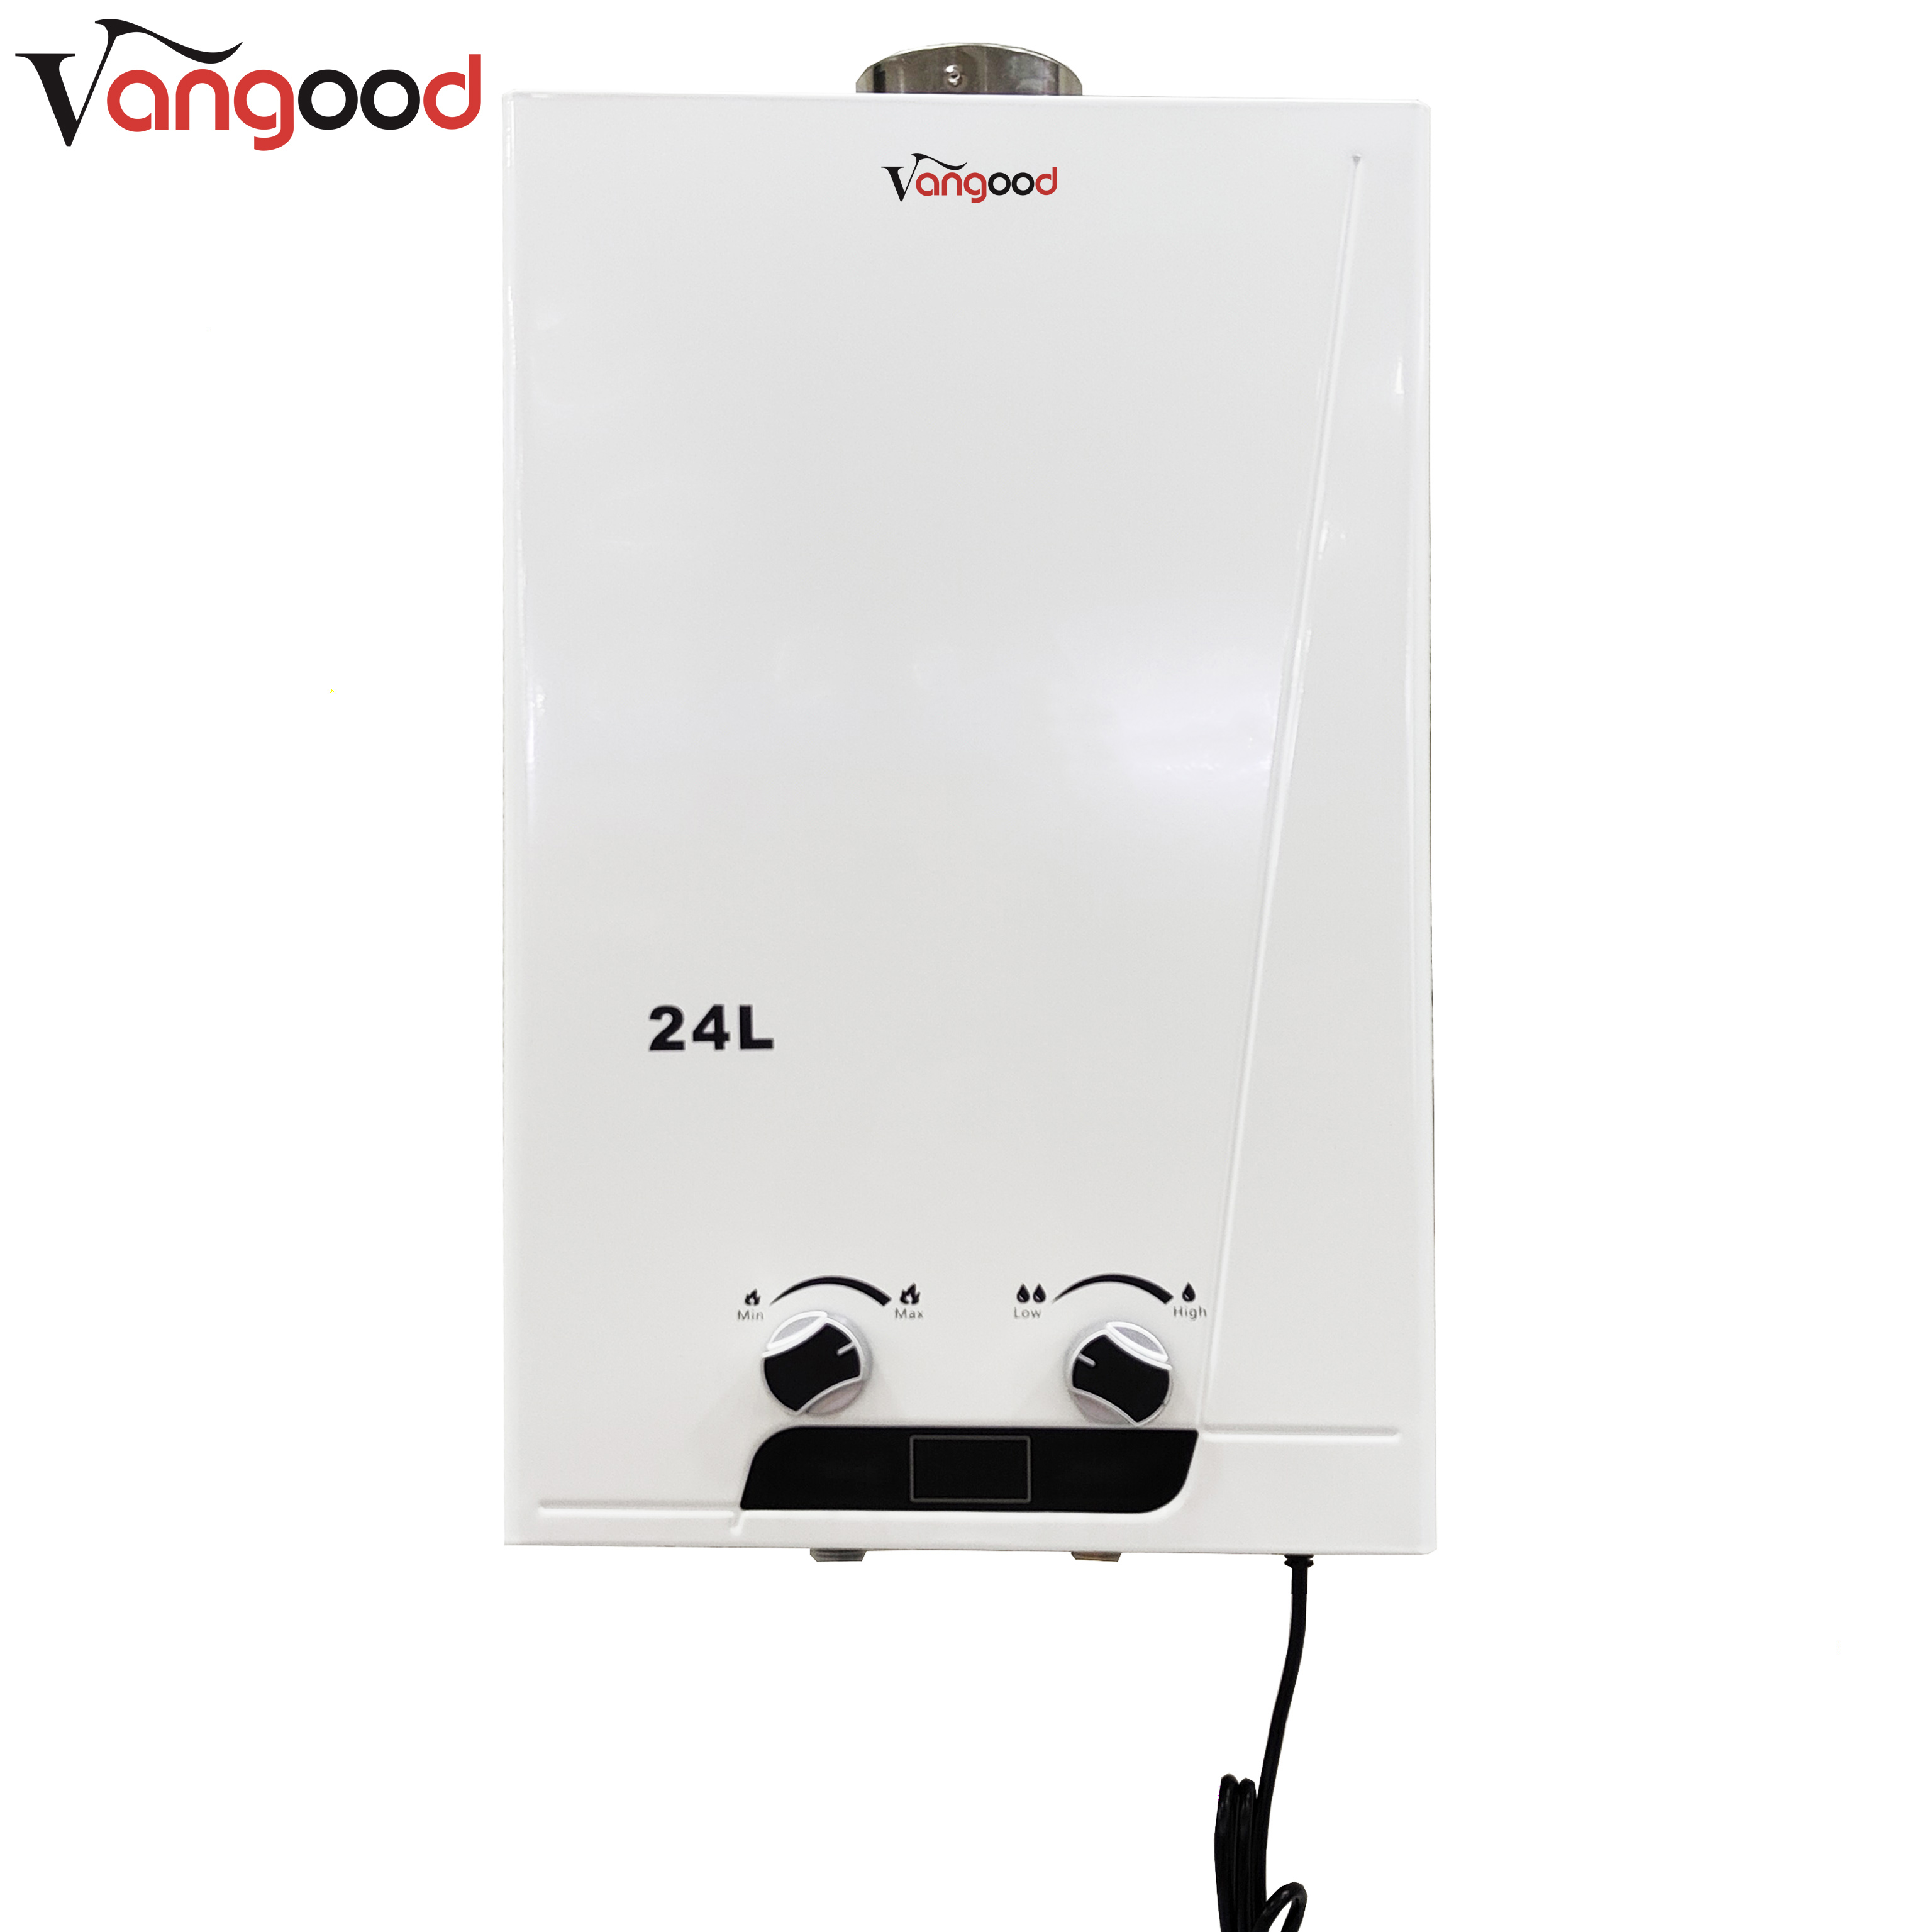 Gas hot water choose water and gas dual adjustment or water volume server?